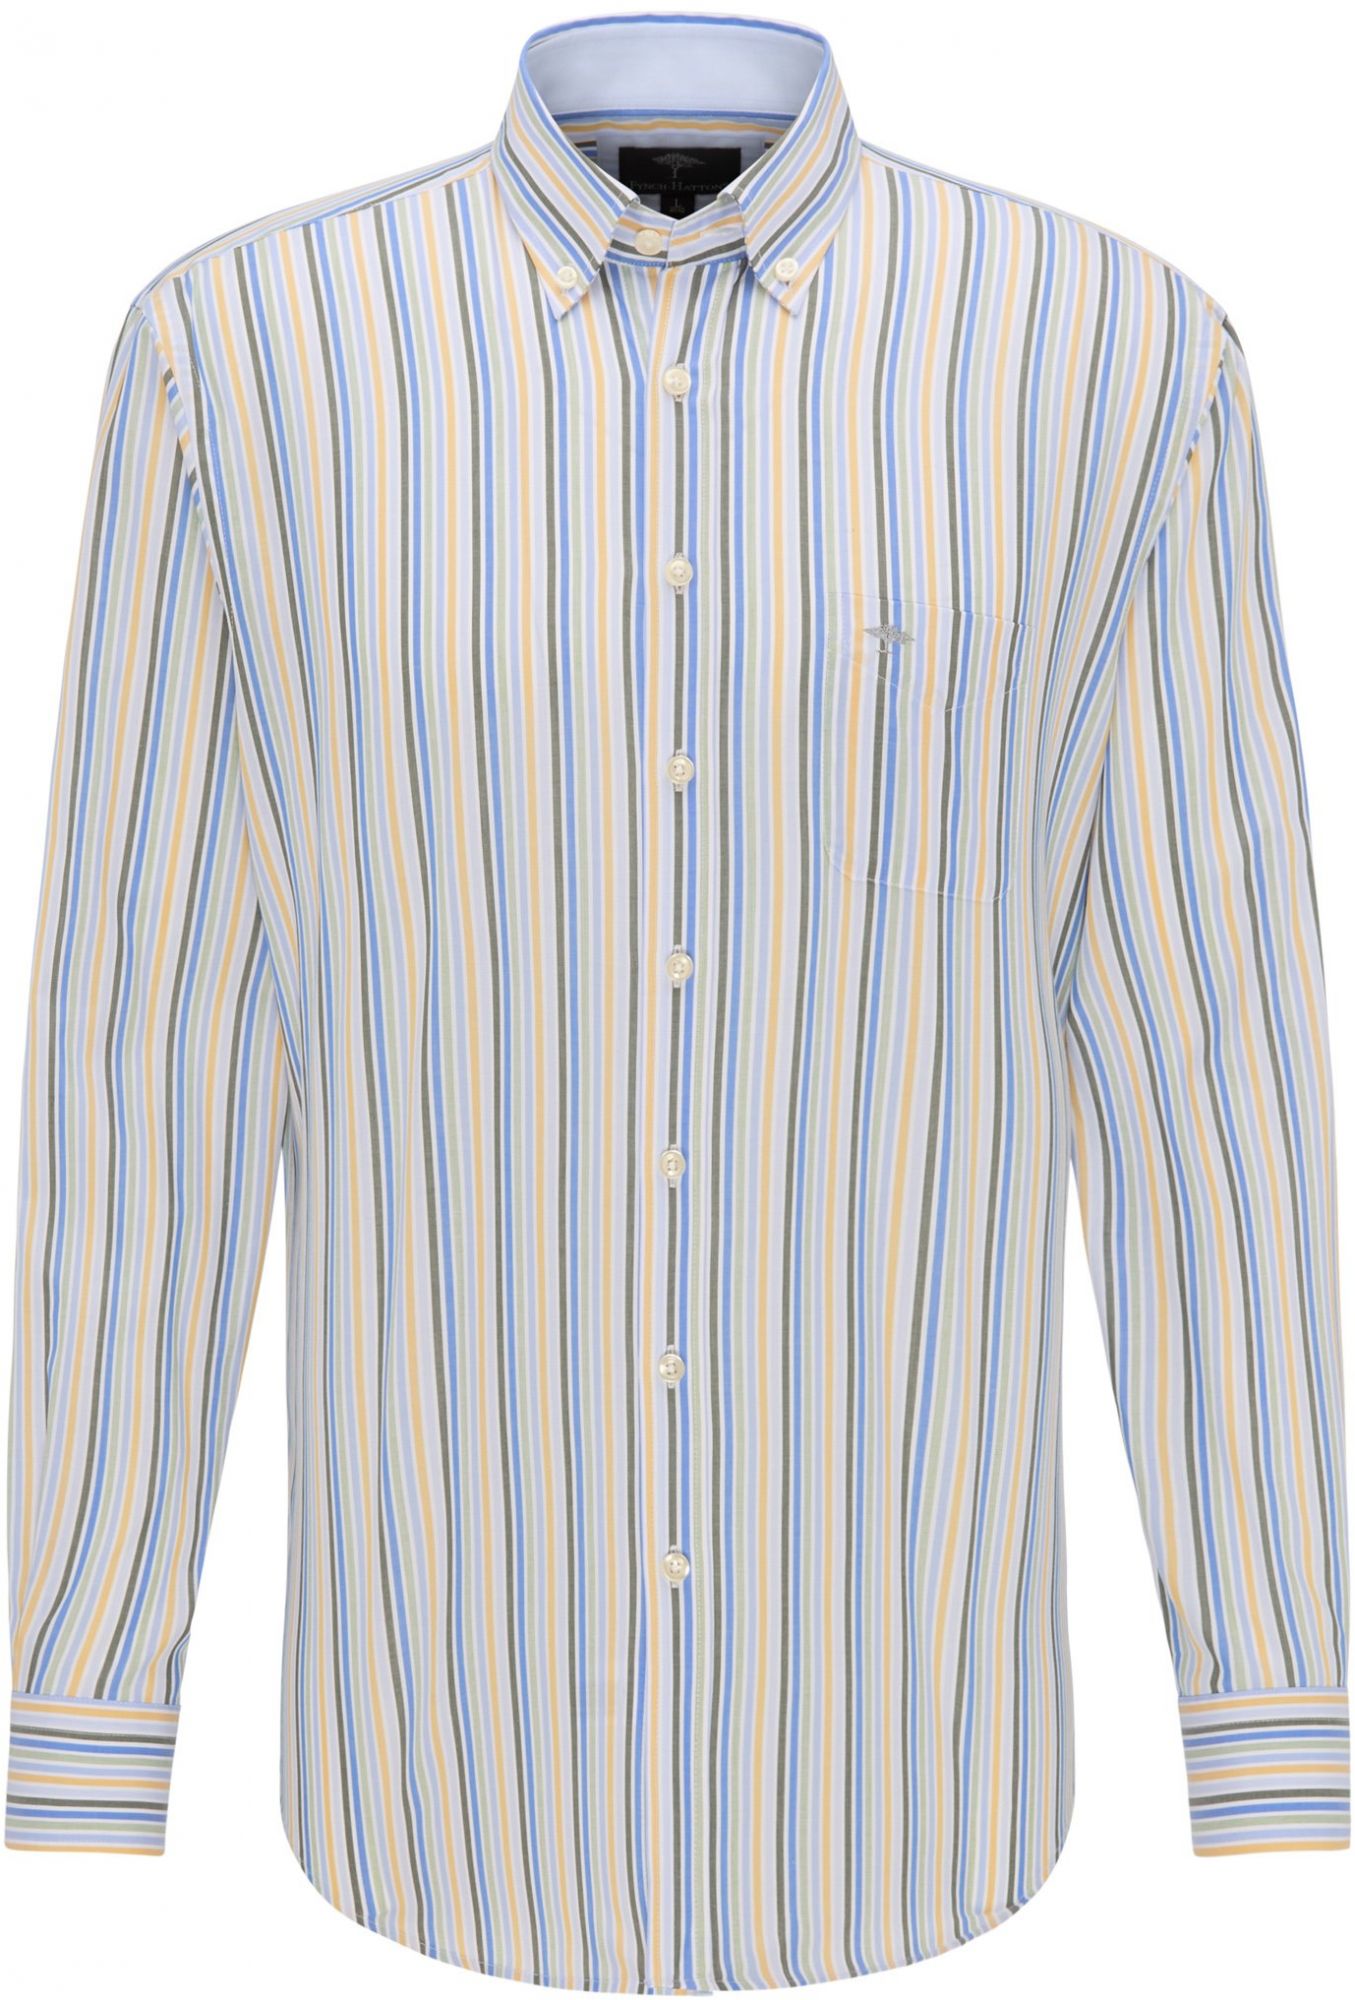 Fynch Hatton Fynch-Hatton Checks and Stripes LS Shirt - Shirts - Barbours